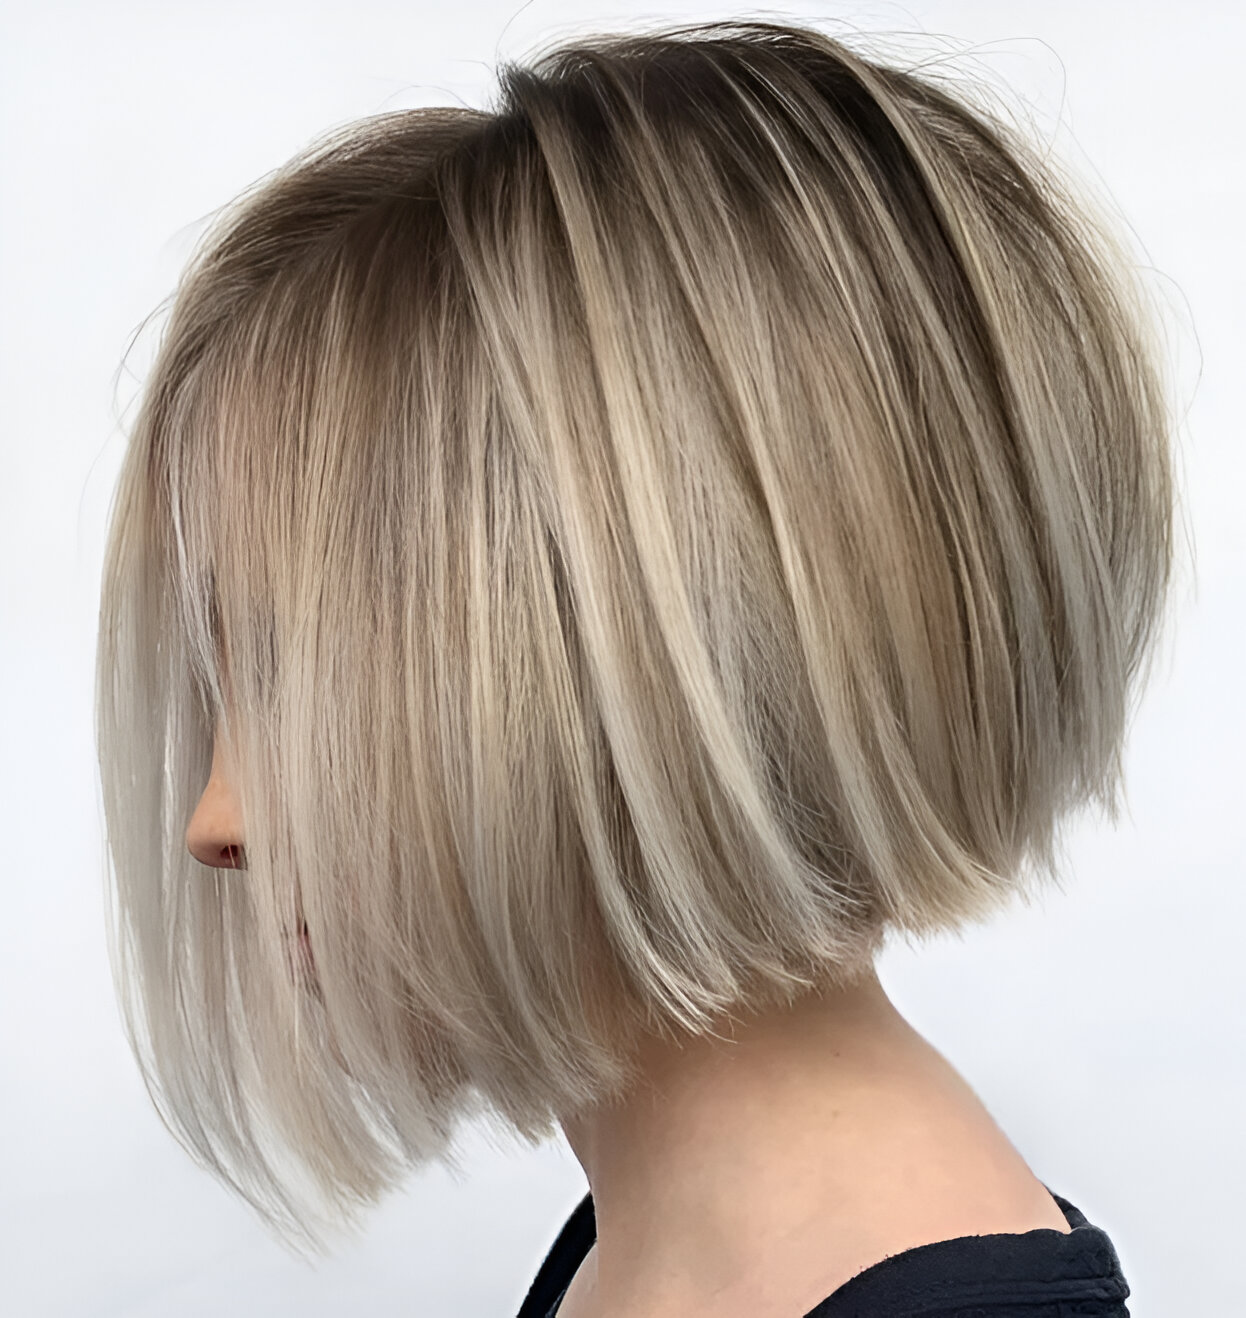 Stacked Bob Hairstyles With Mixed Highlights